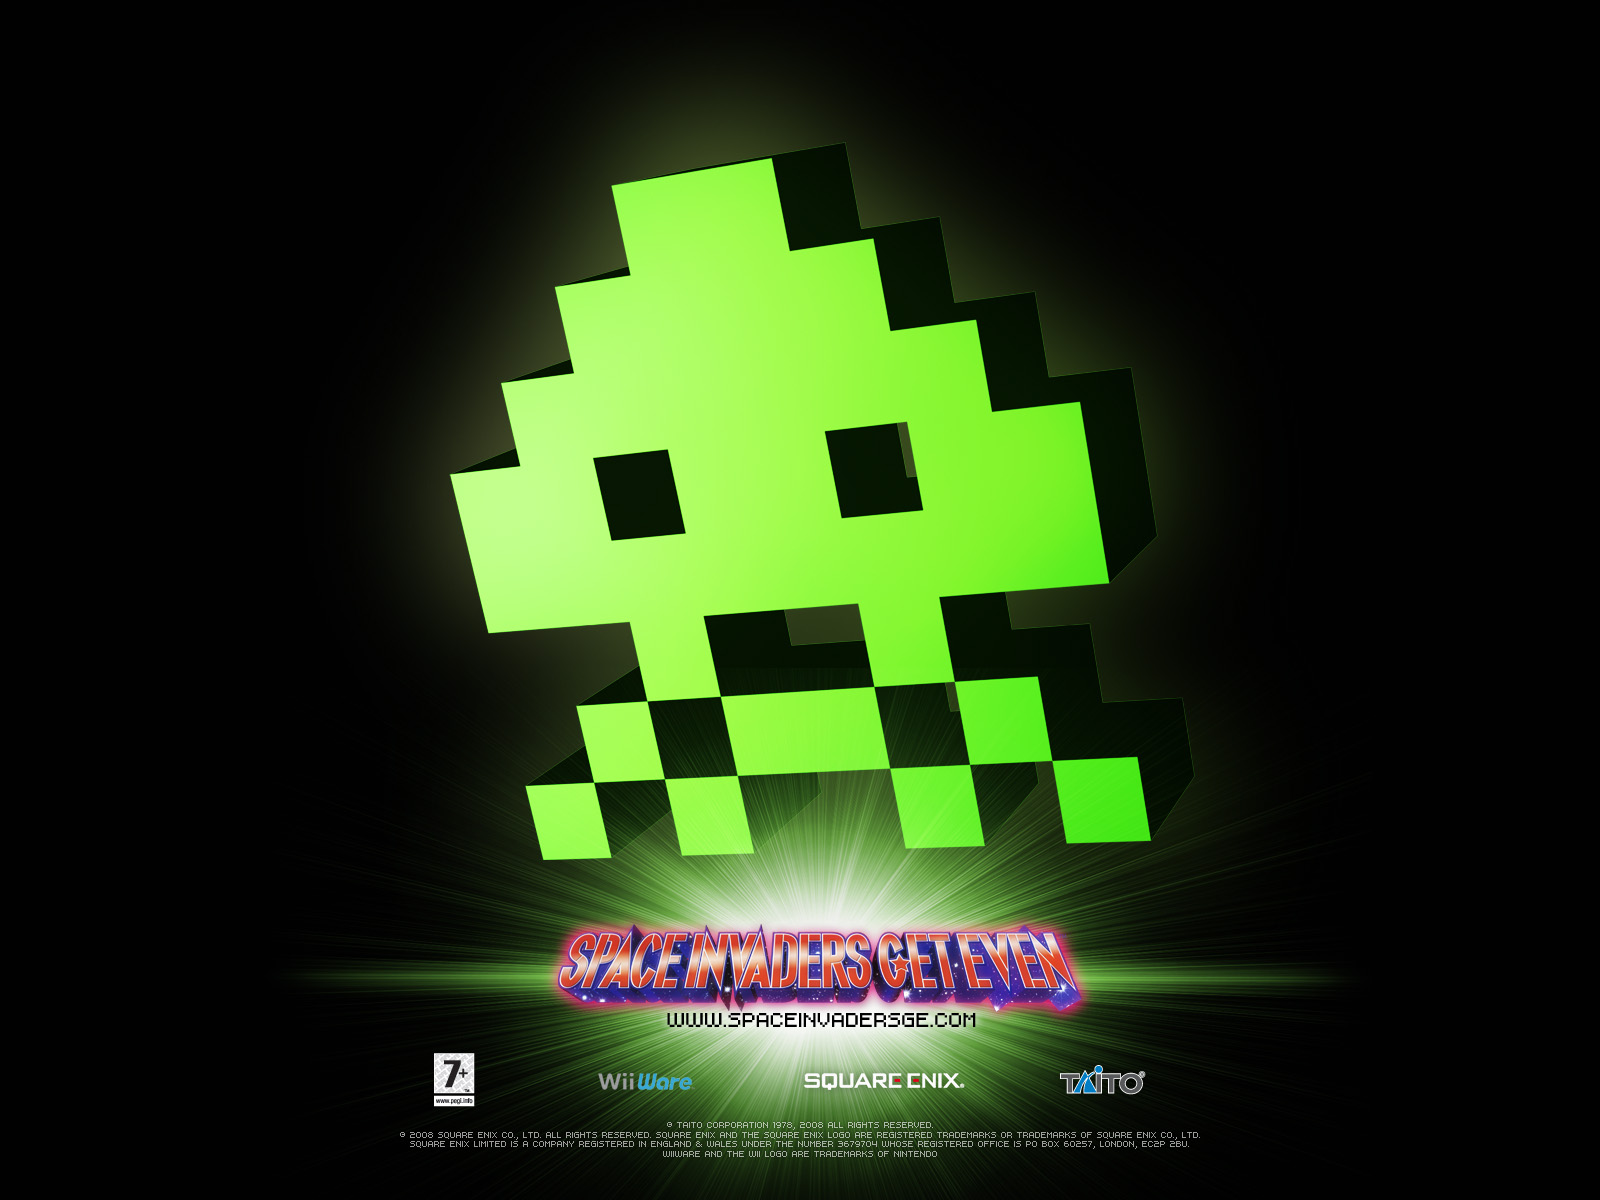 Game Space Invaders Get Even Wallpaper Of